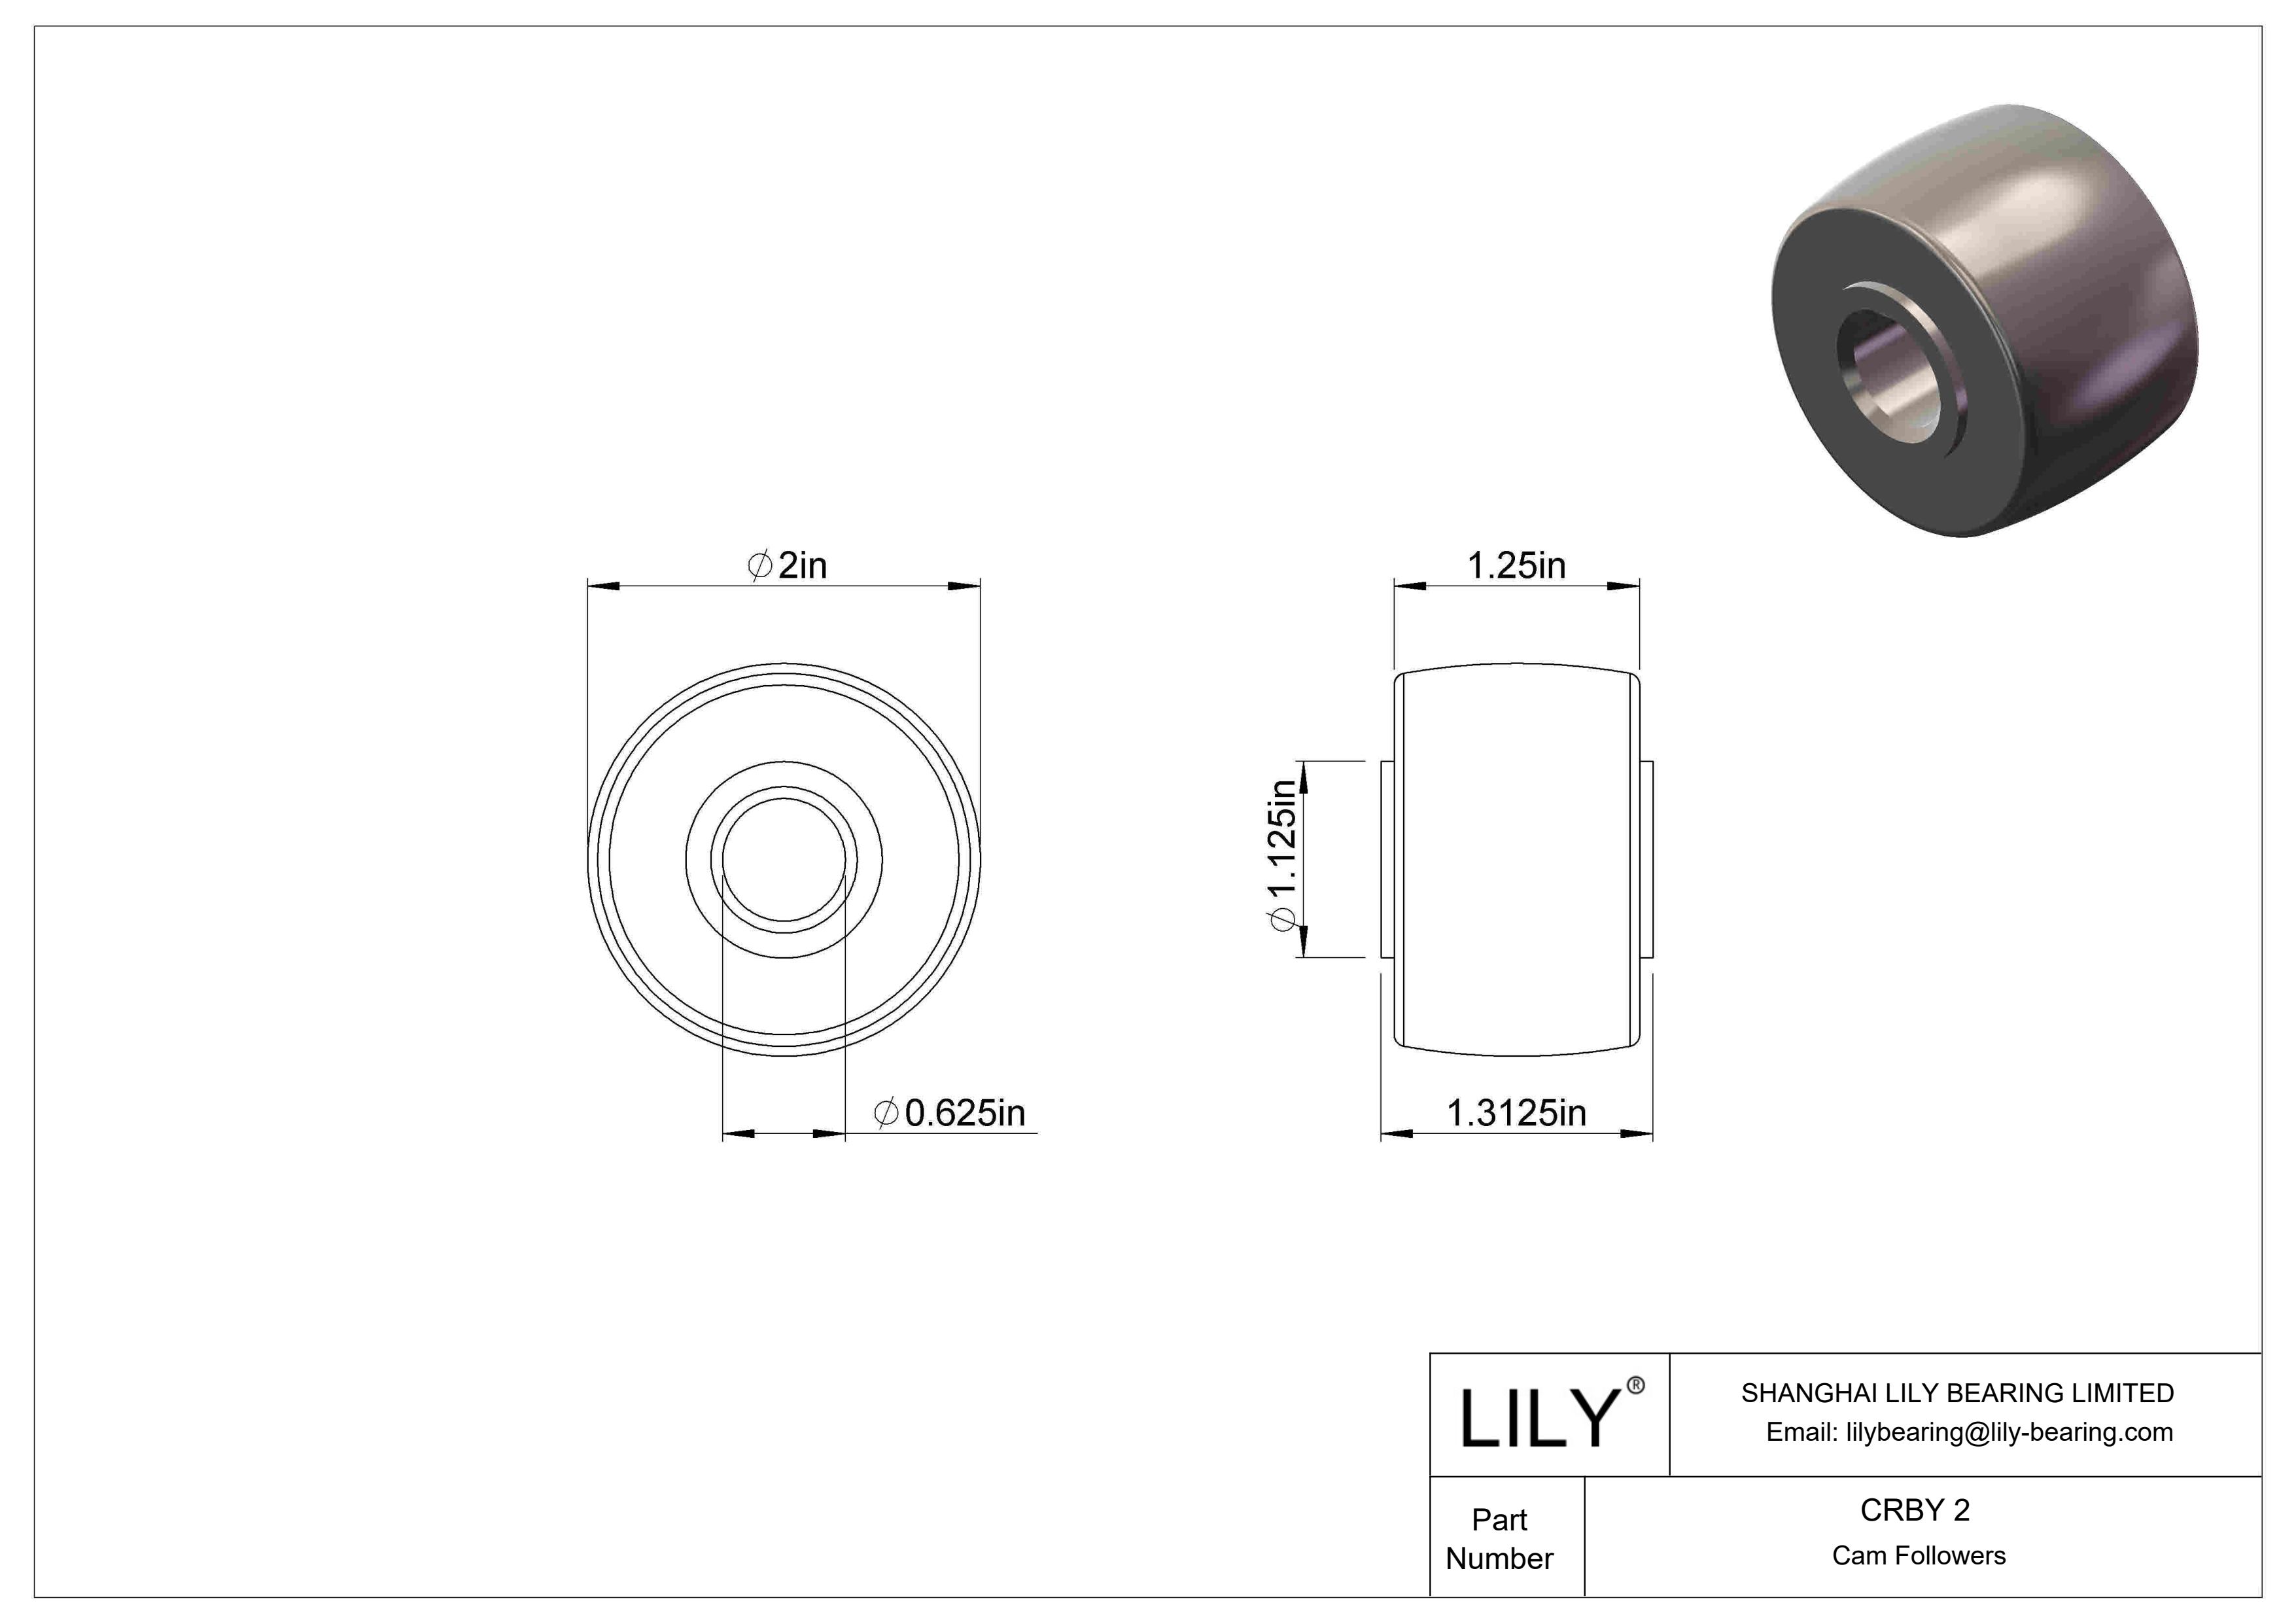 CRBY 2 Roller Cam Follower-Yoke Type cad drawing